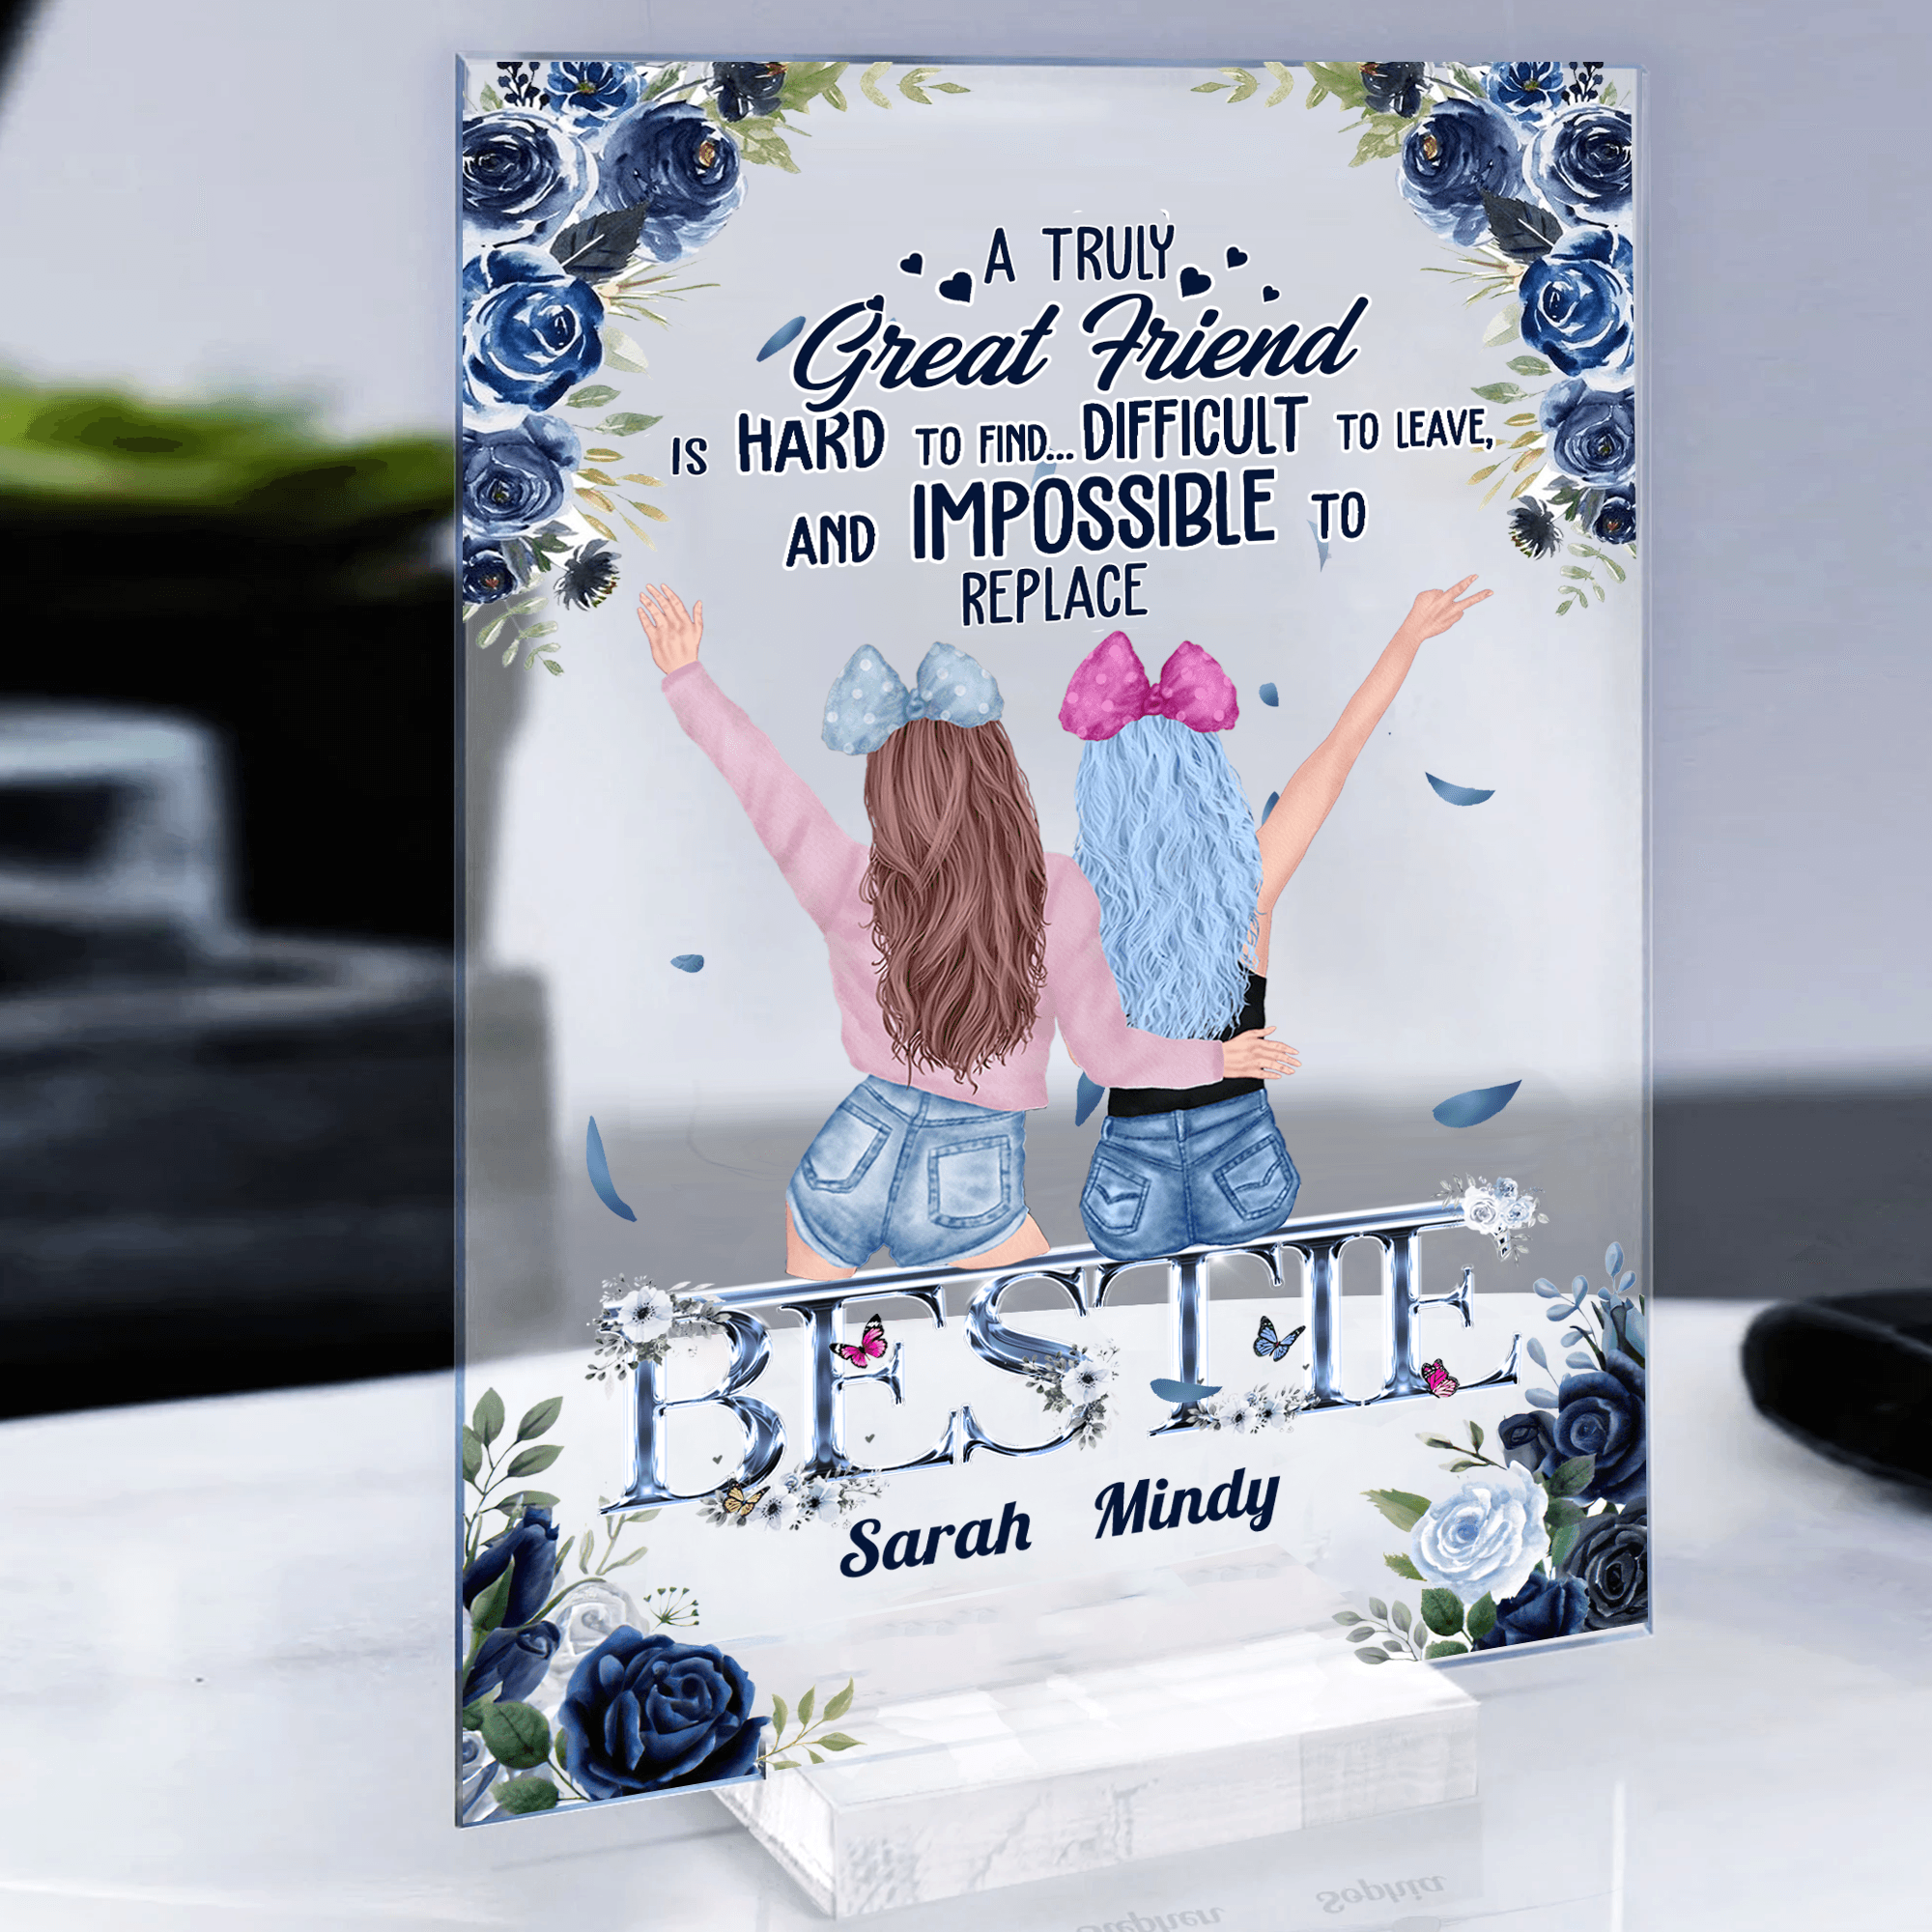 irreplacable bestie personalized acrylic plaque personalized gift for besties sisters best friends siblings ap029ps02 bmgifts 2 22023963902055